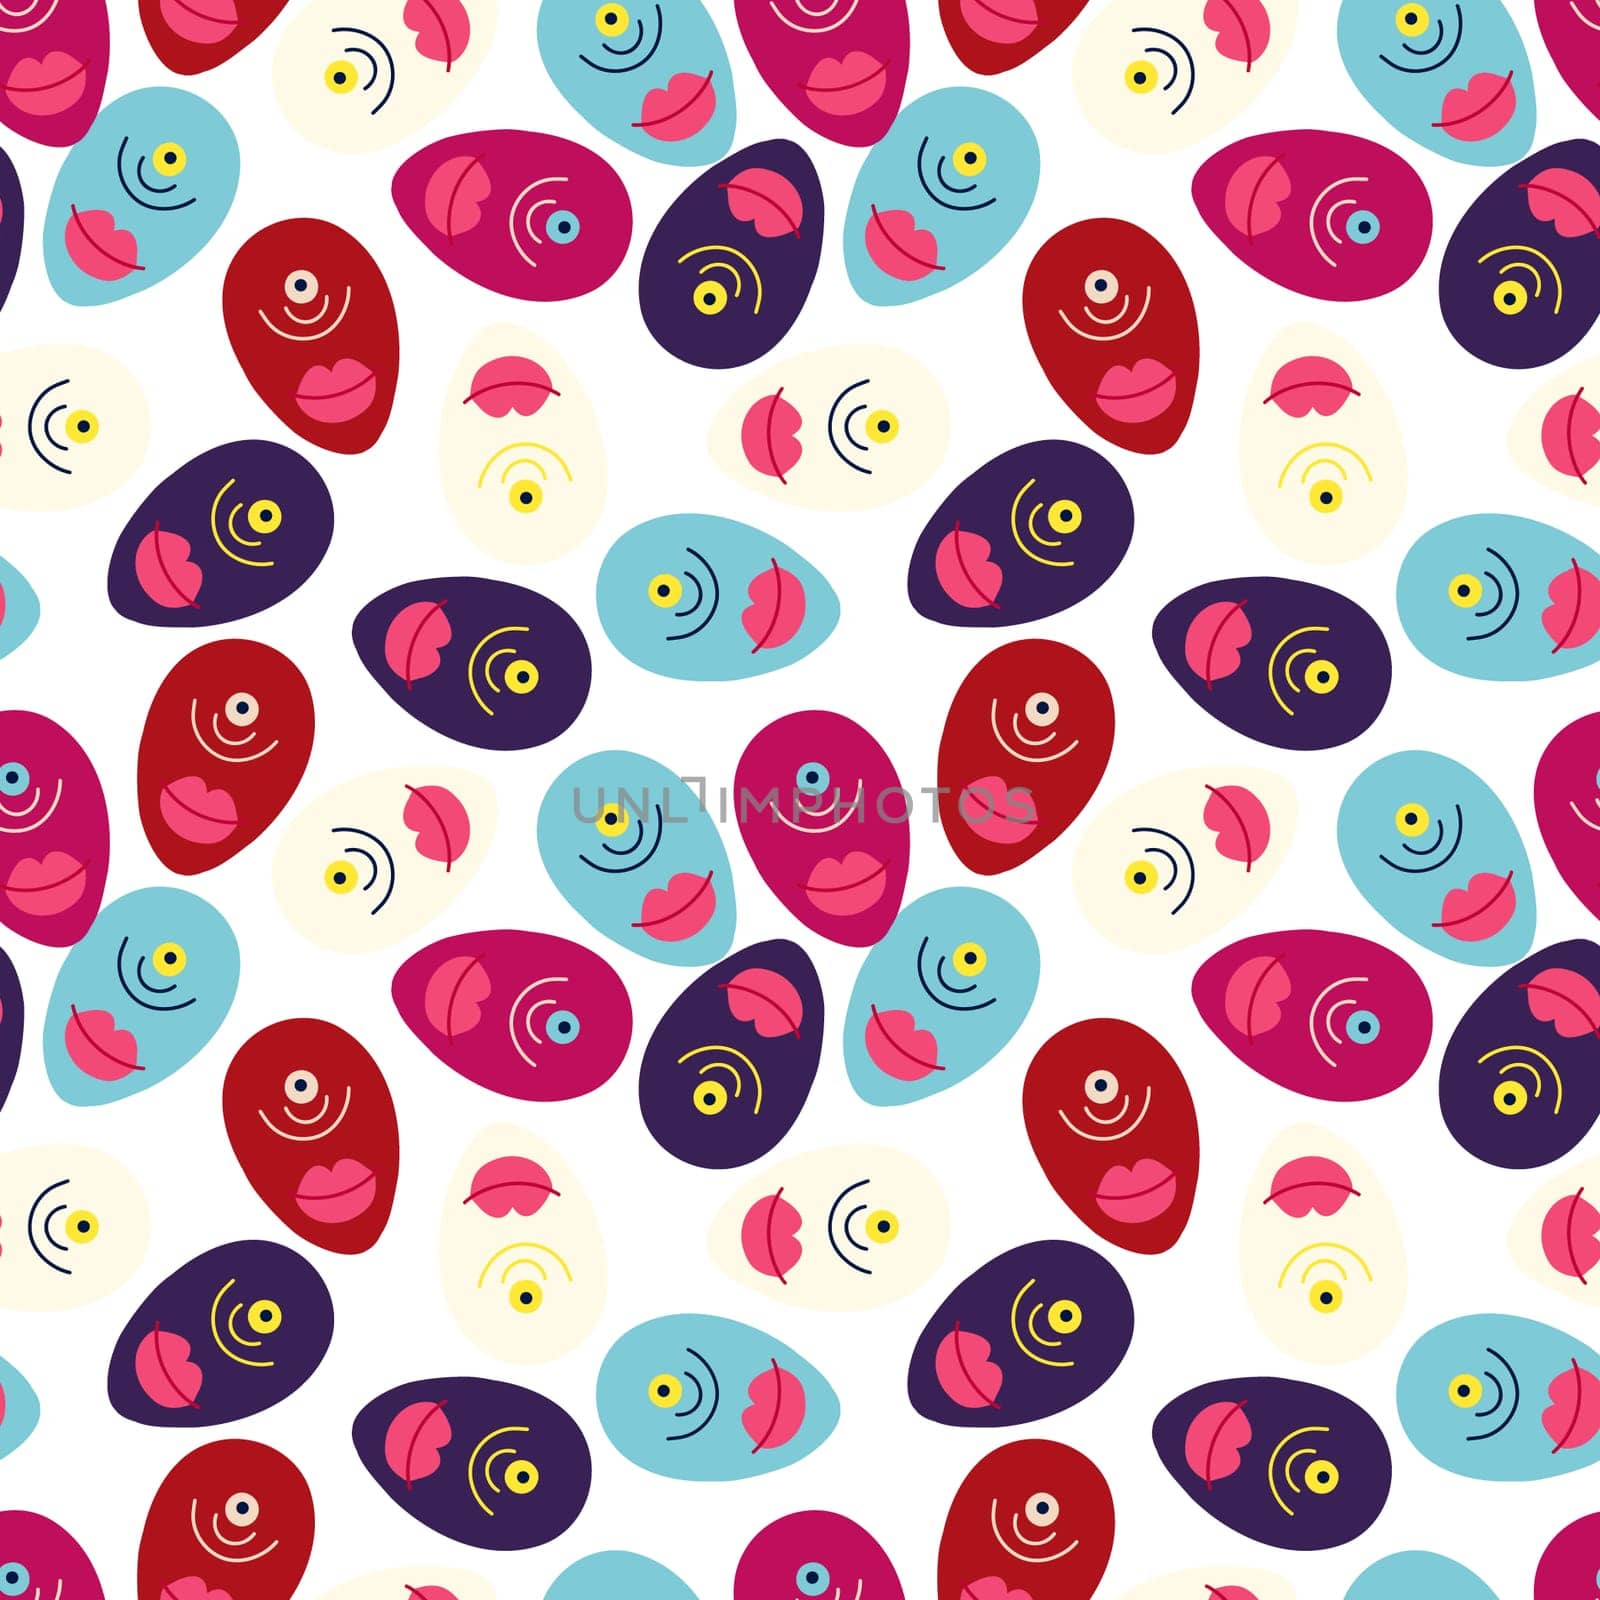 A pink background with a pattern of faces and lips. The faces are all different colors and sizes, and the lips are pink. Scene is playful and whimsical